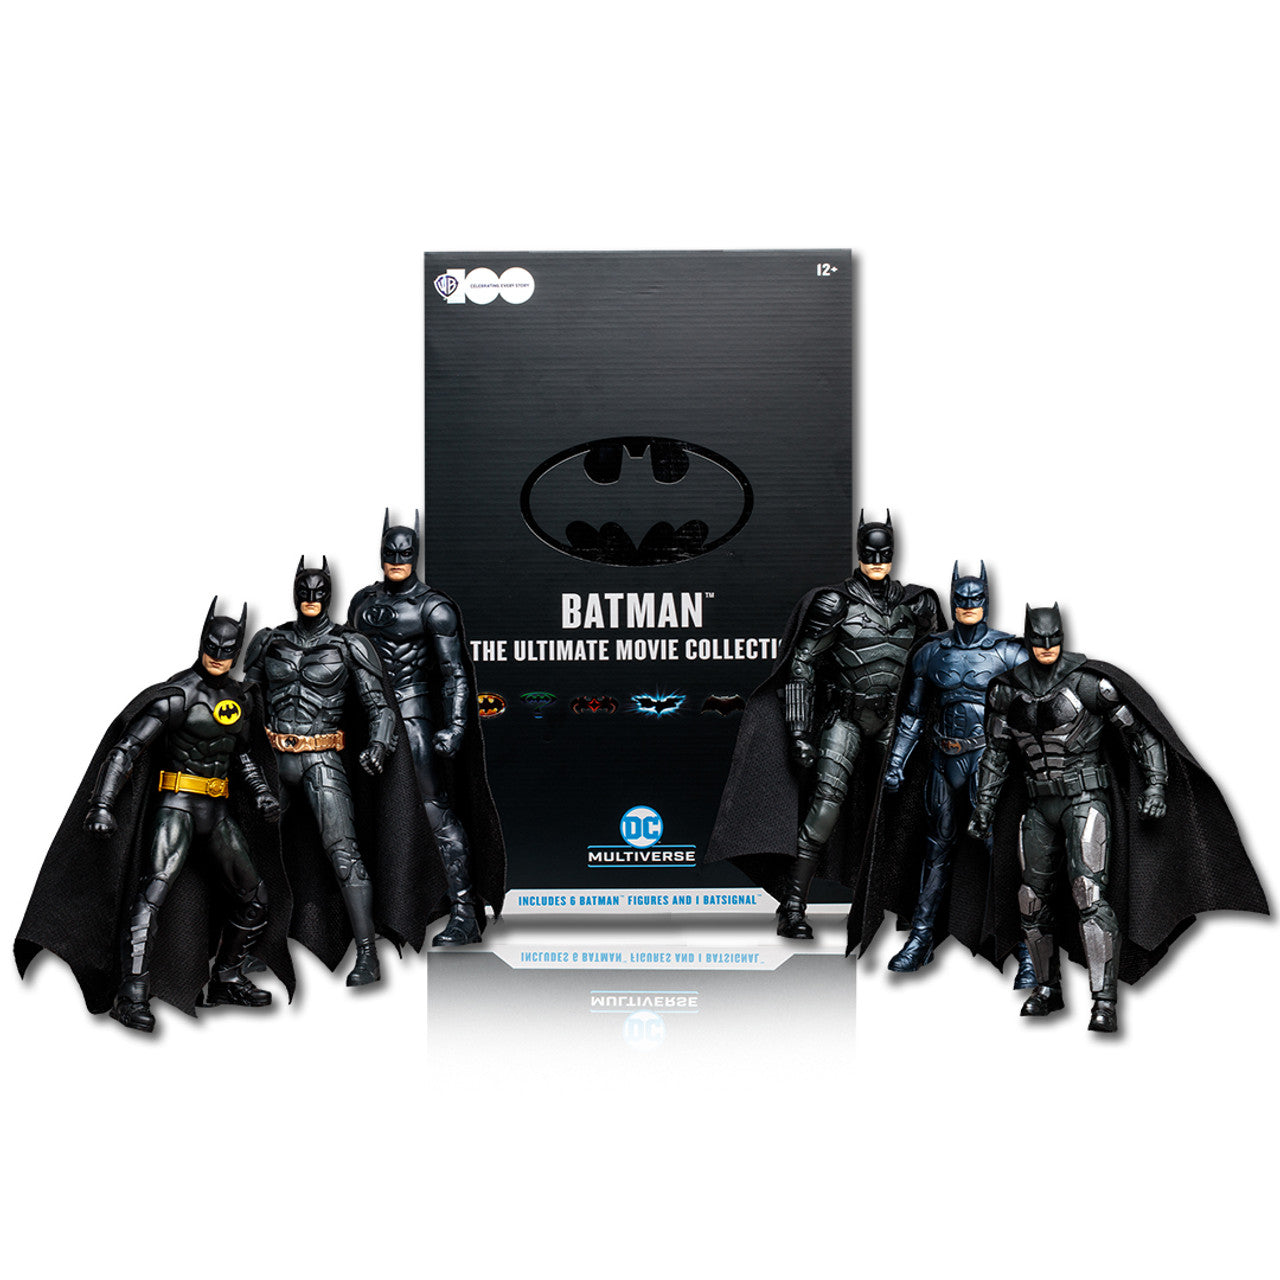 Batman The Ultimate Movie Collection (WB 100 DC Multiverse) 6-Pack 7" Figures